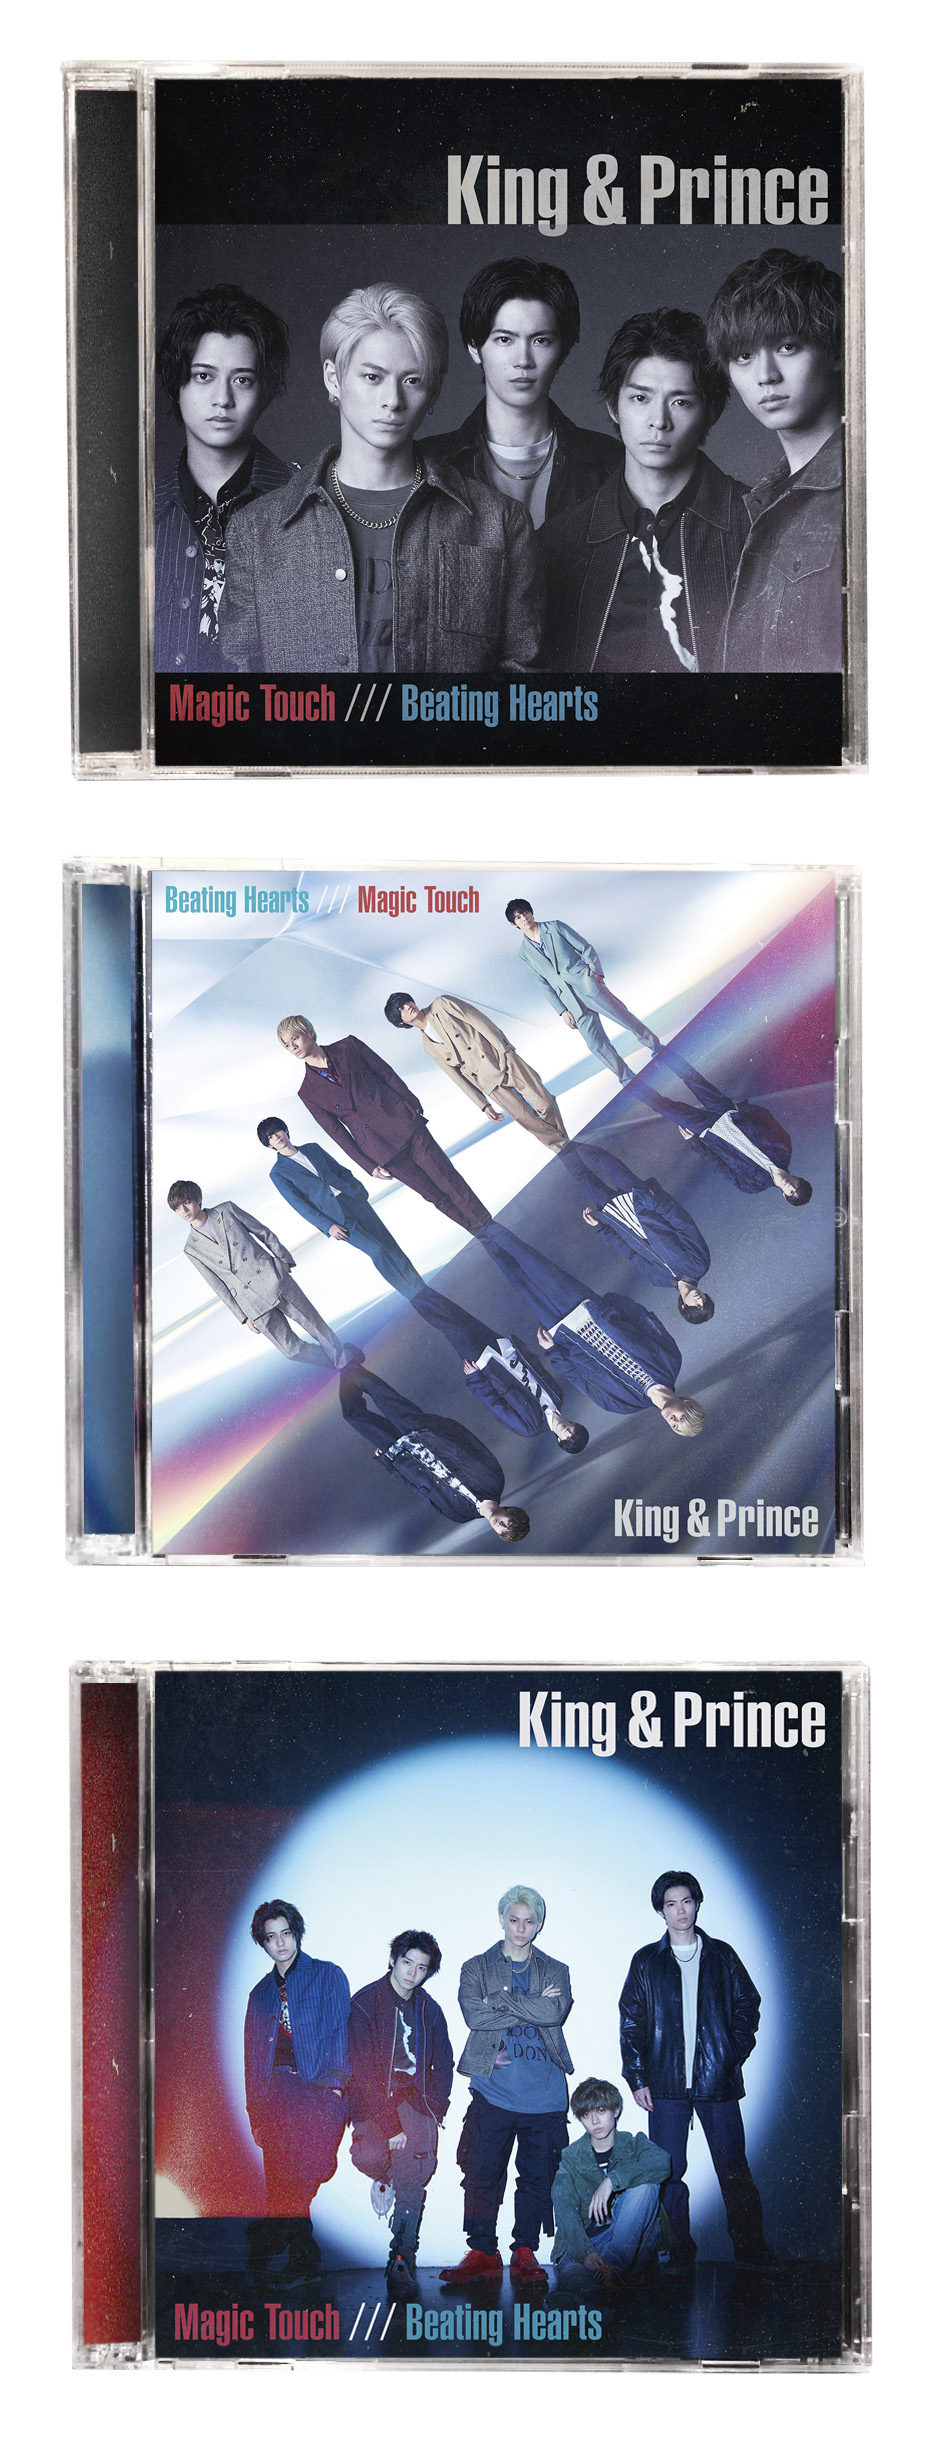 King&Prince “Magic Touch / Beating Hearts” CD Jacket Design 